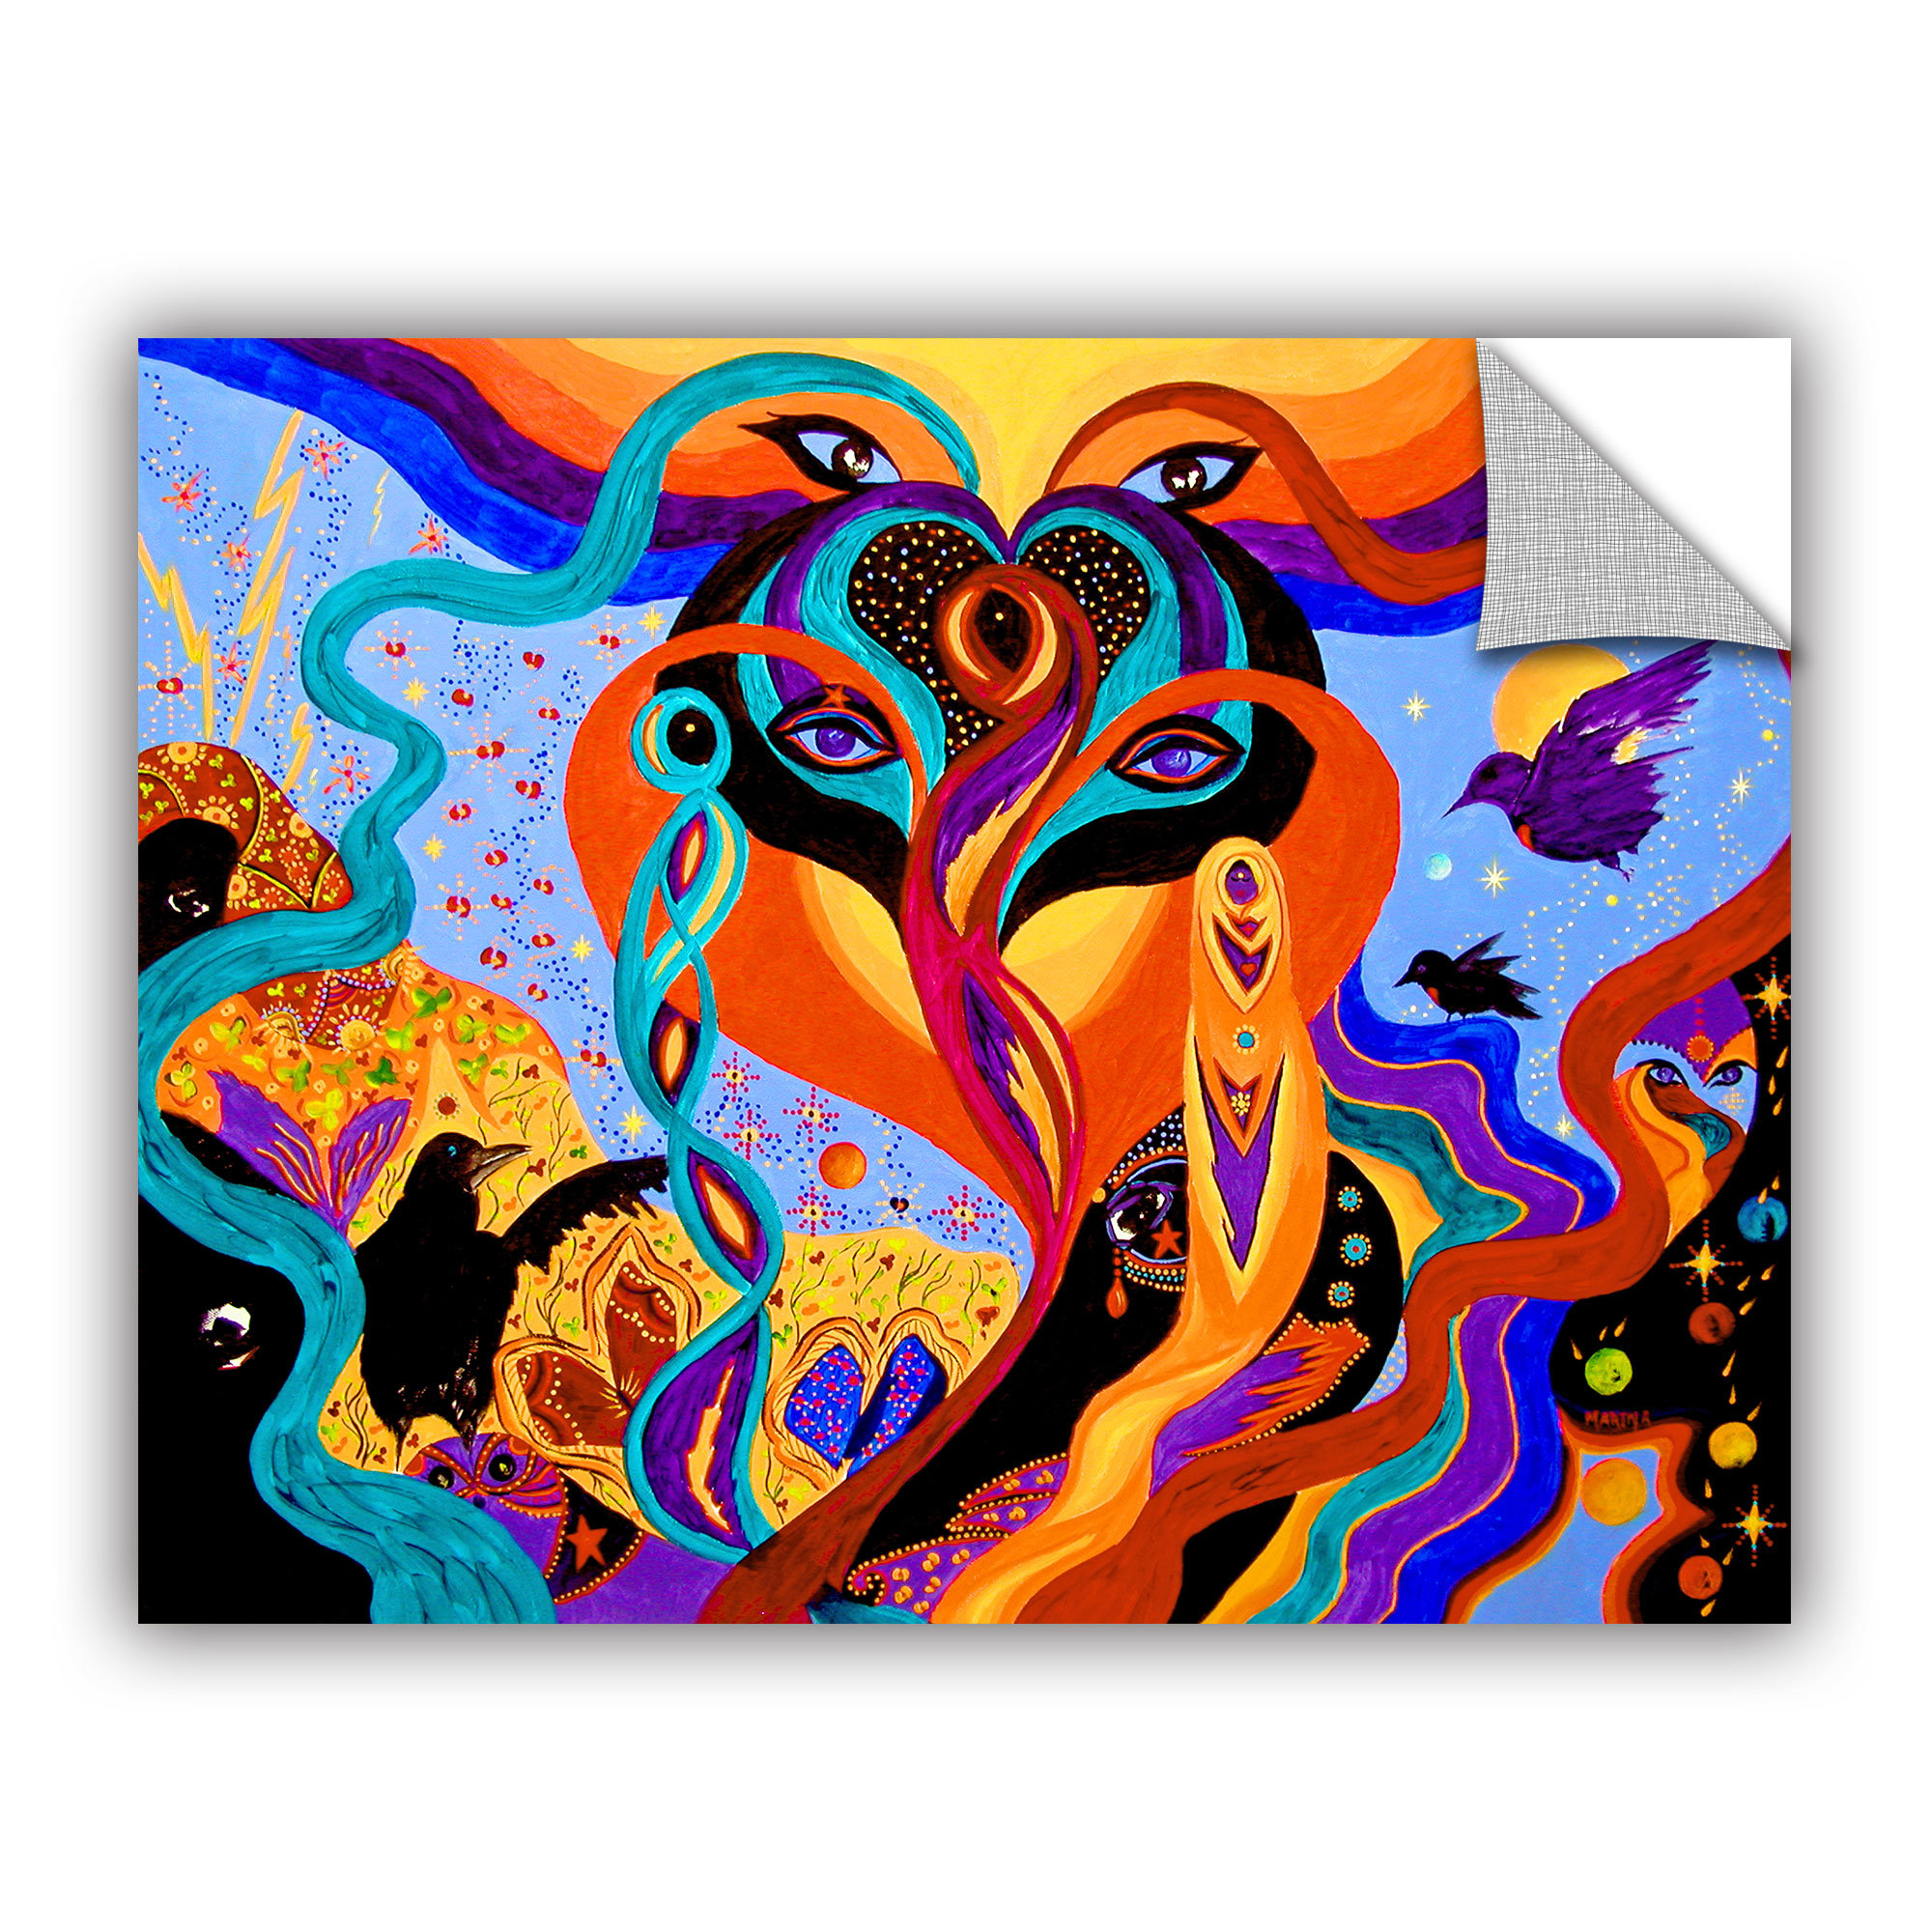 ArtWall Marina Petro Karmic Lovers Gallery Wrapped Canvas Art 14 by 18-Inch 